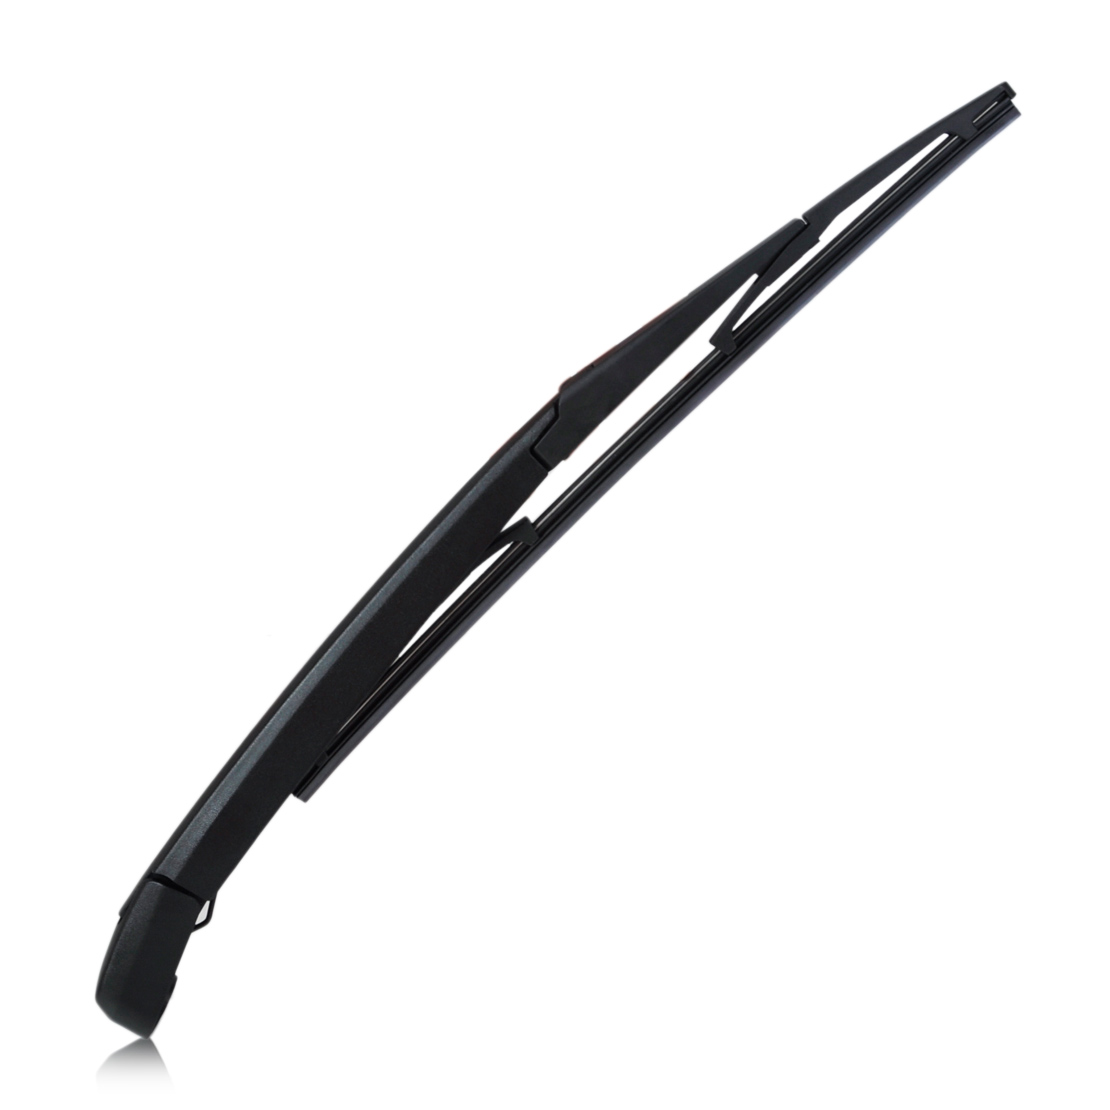 Replace Rear Windshield Wiper Arm &Blade fit forLEXUS RX300 RX330 RX350 RX400h | eBay Windshield Wipers For 2008 Lexus Rx 350